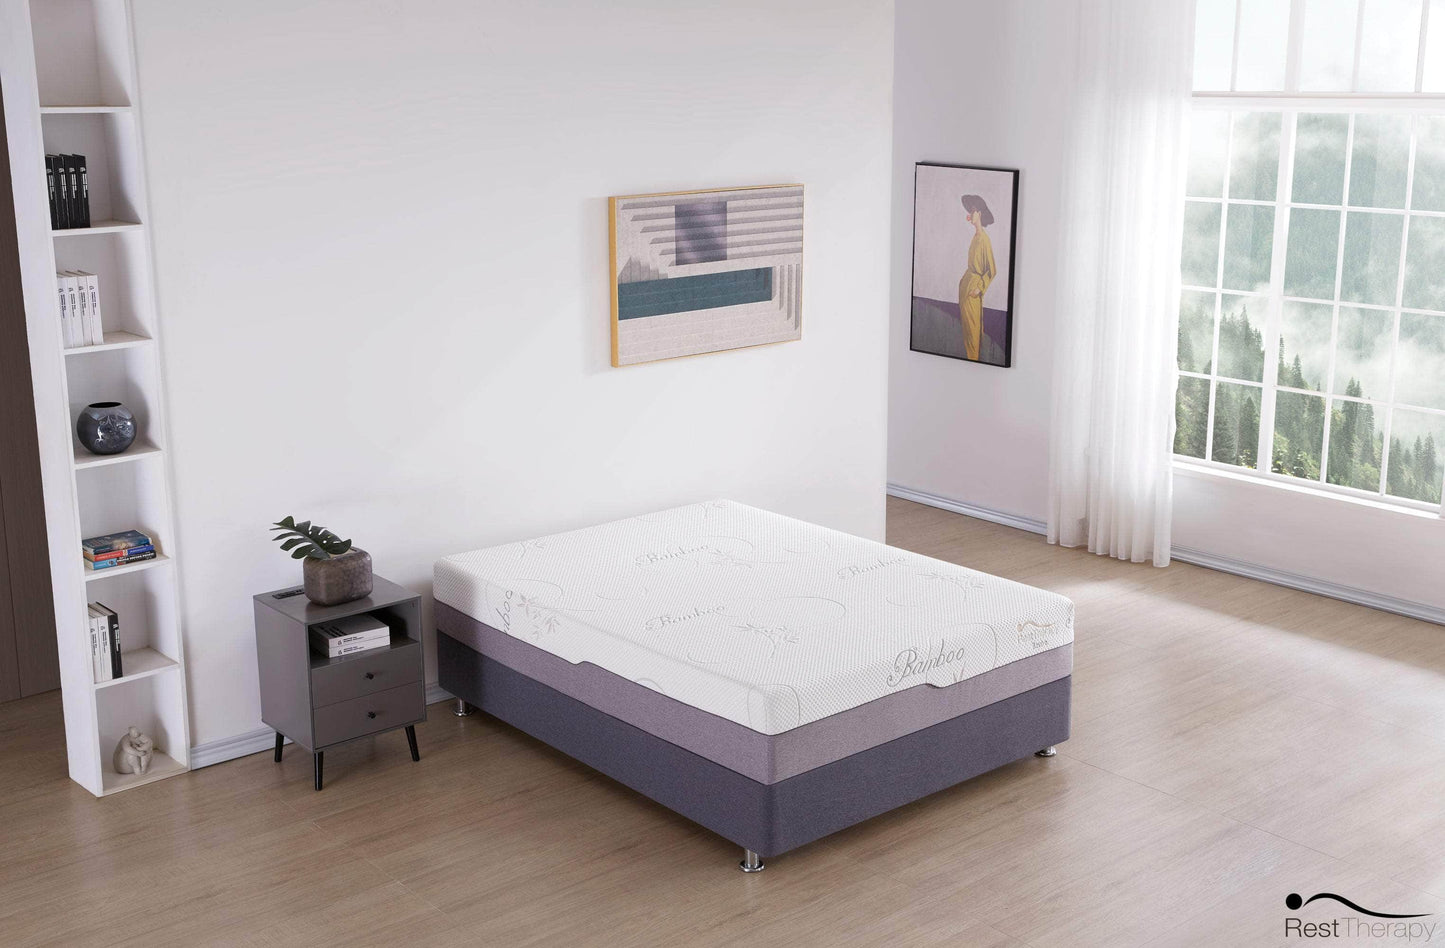 Rest Therapy Mattress 12 Inch Revive Bamboo Cool Gel Memory Foam Mattress - Available in 2 Sizes